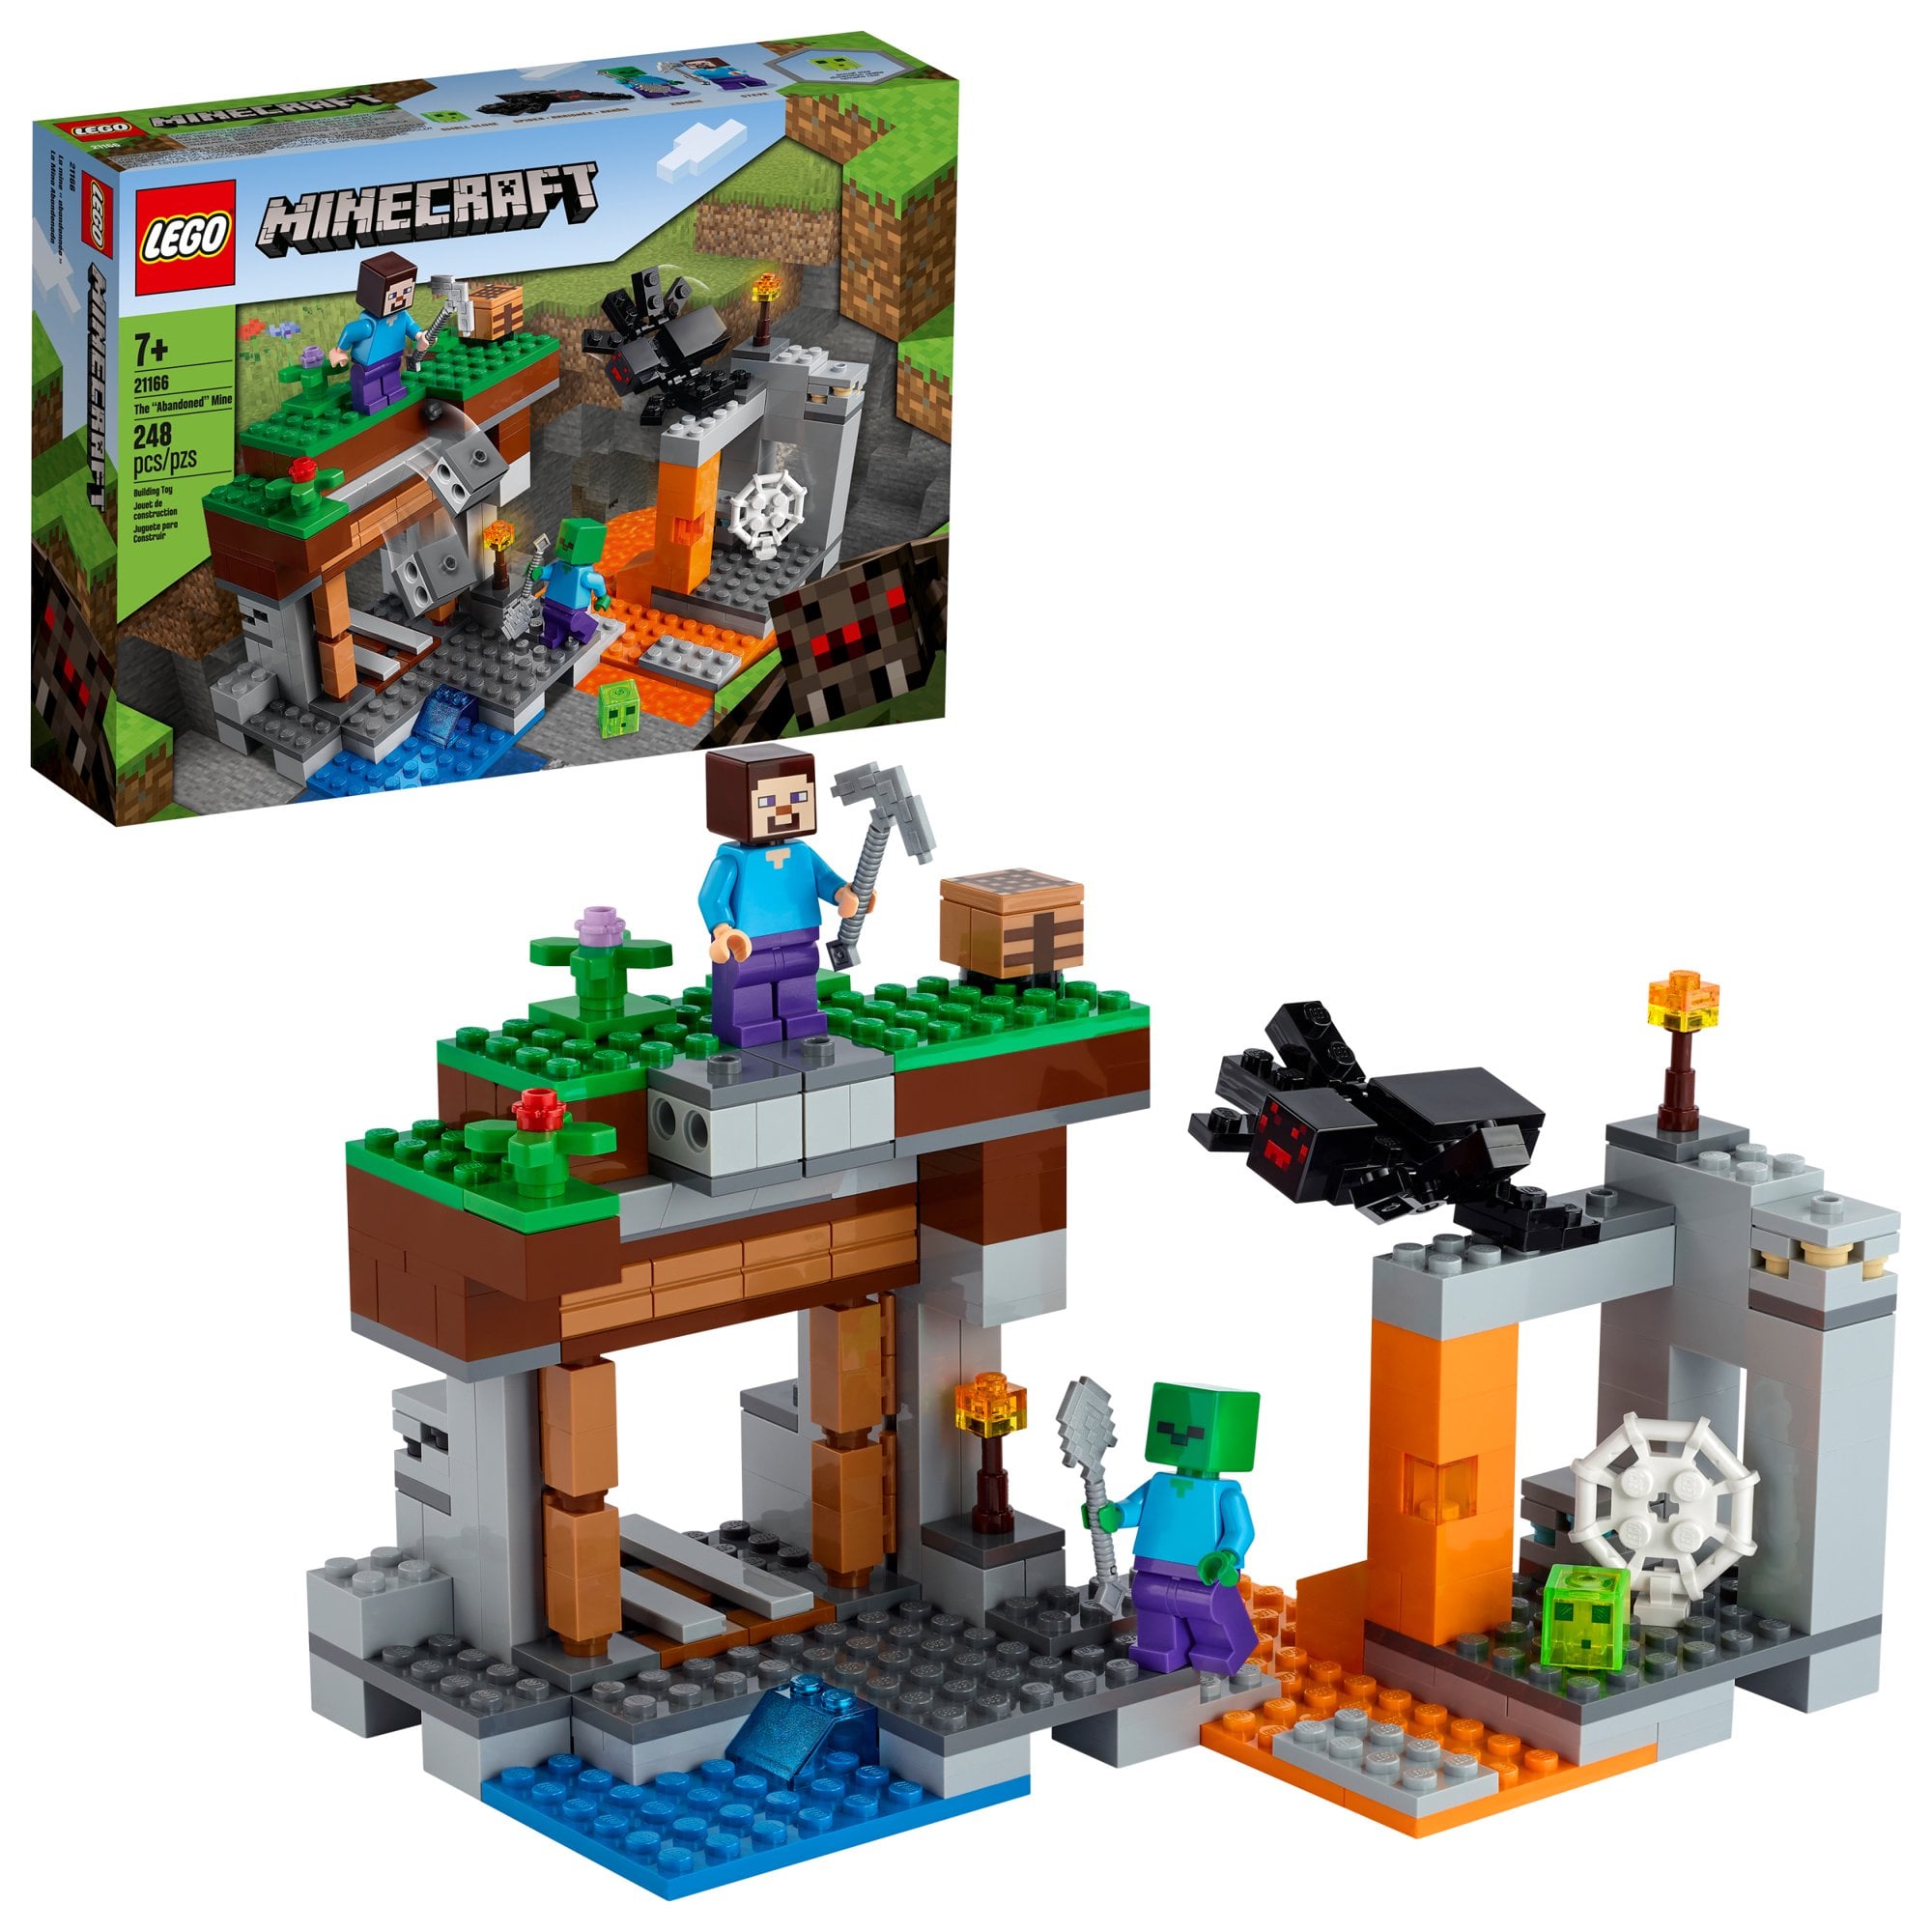 Lego Minecraft The Abandoned Mine The 63 New 21 Lego Sets We Know About So Far But Trust More Are Coming Popsugar Family Photo 50